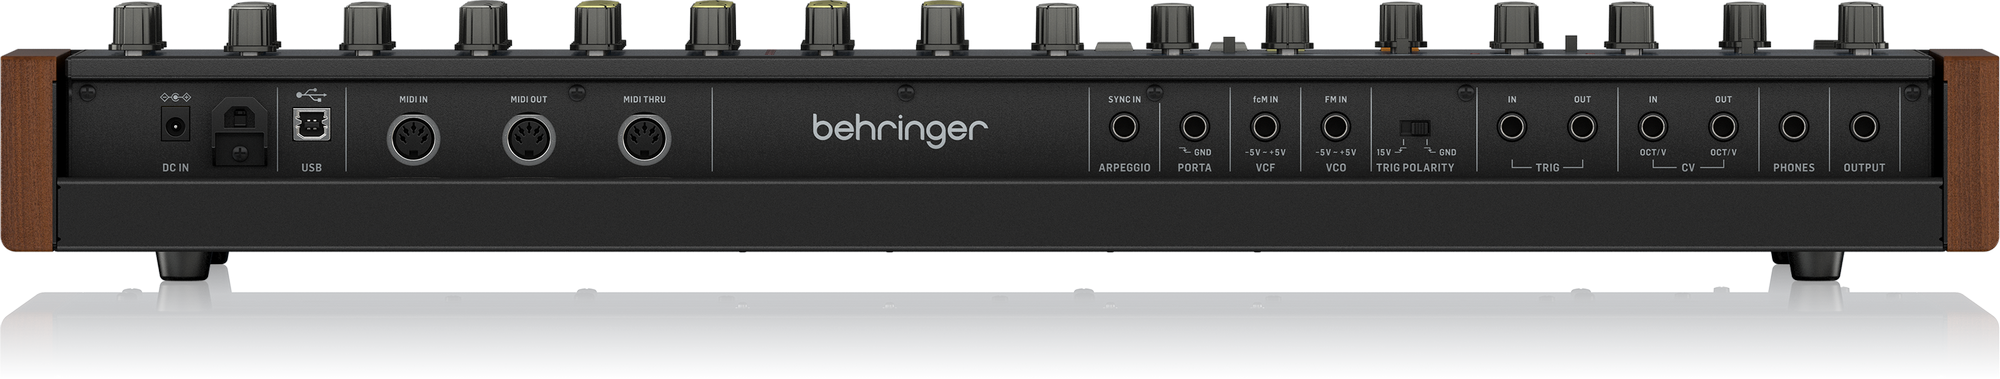 Behringer | Product | MONOPOLY